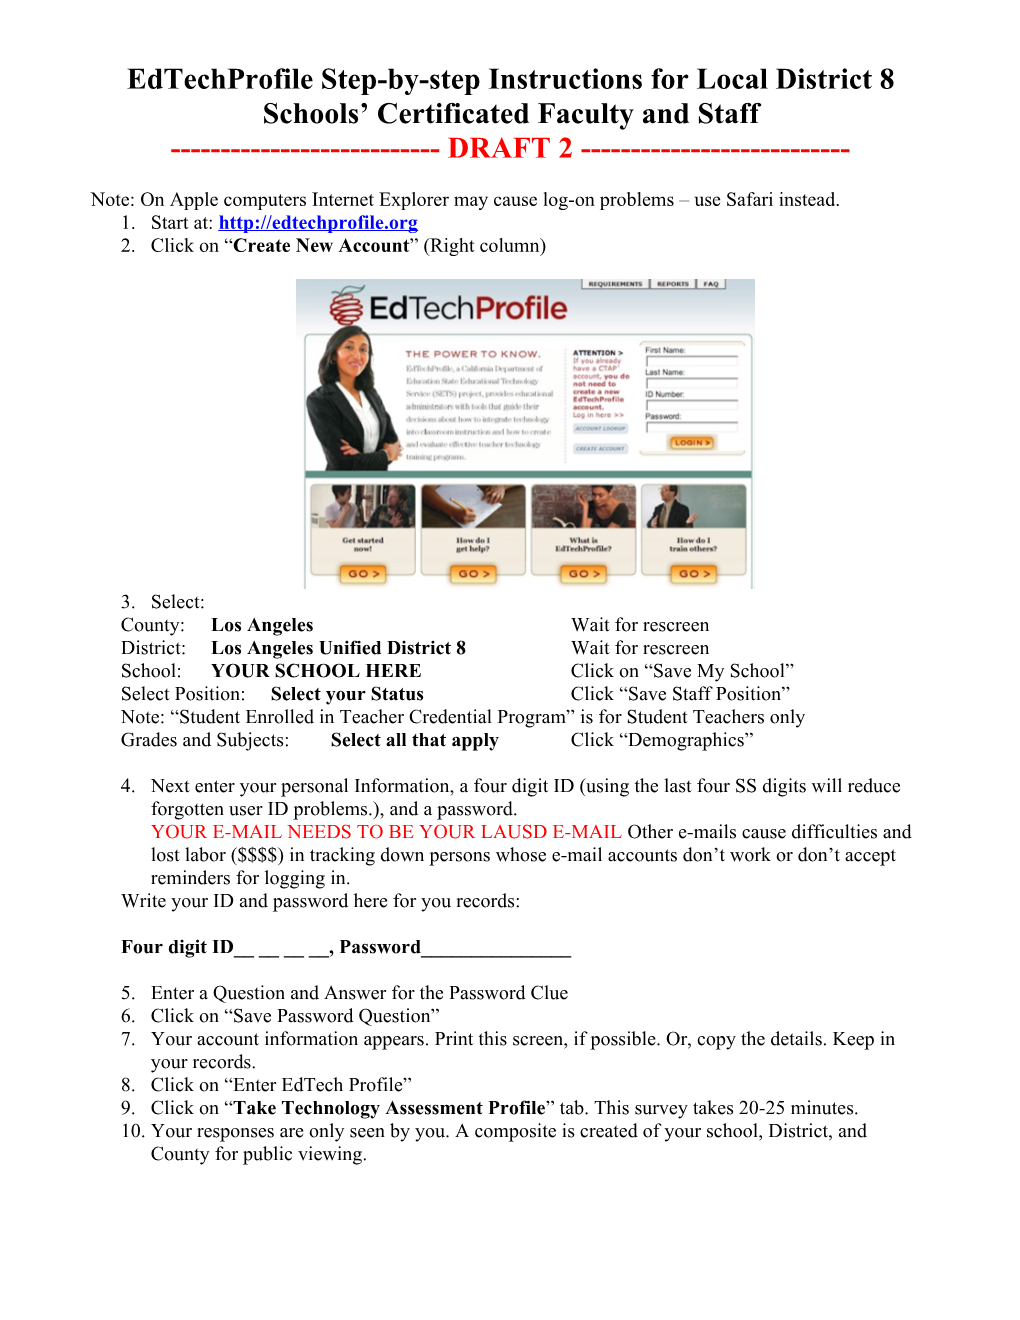 Edtechprofile Step-By-Step Instructions for Local District 8 Schools Certificated Faculty